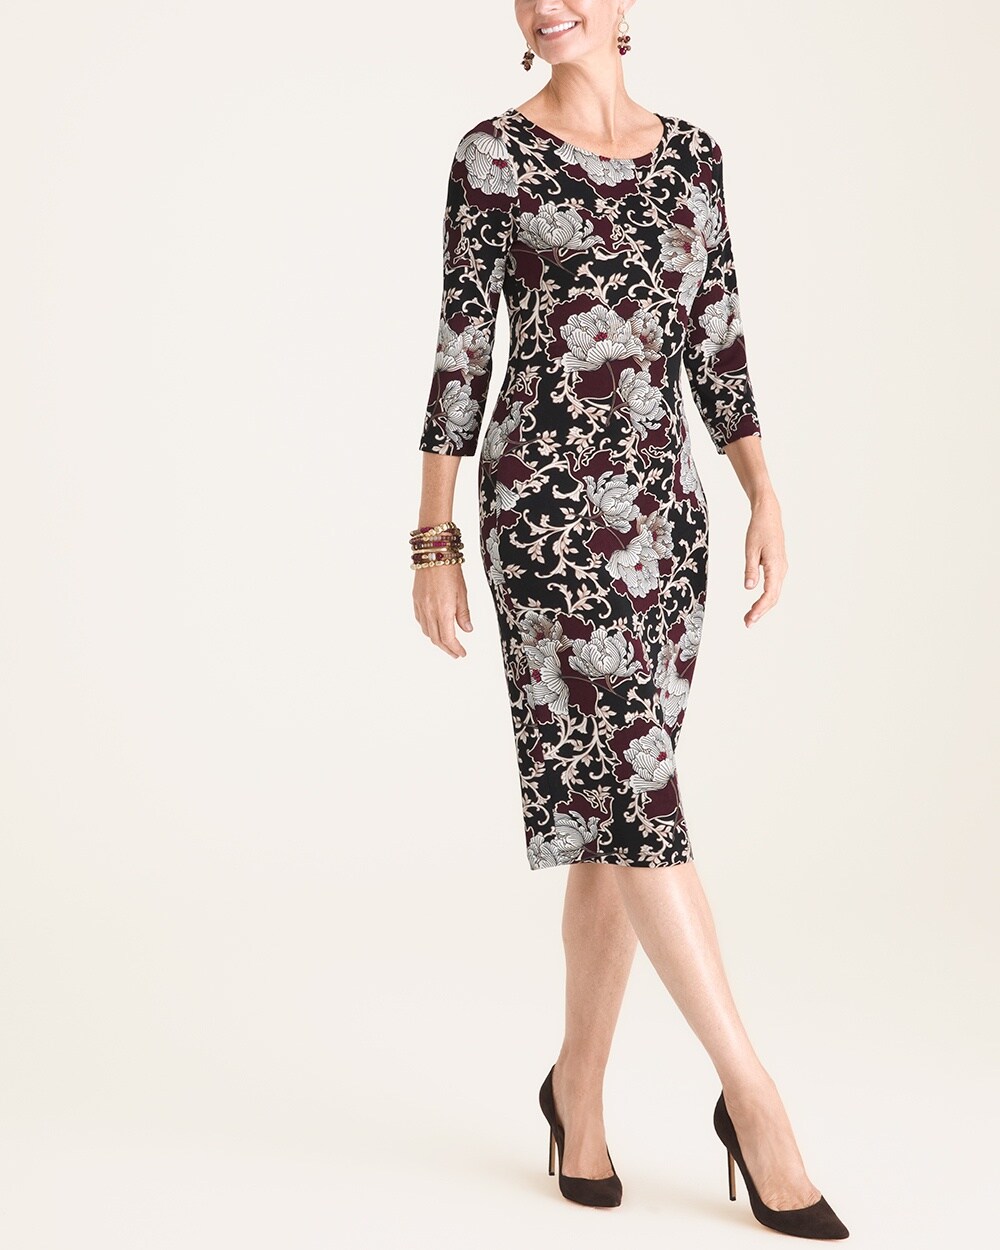 Travelers Classic Floral Dress